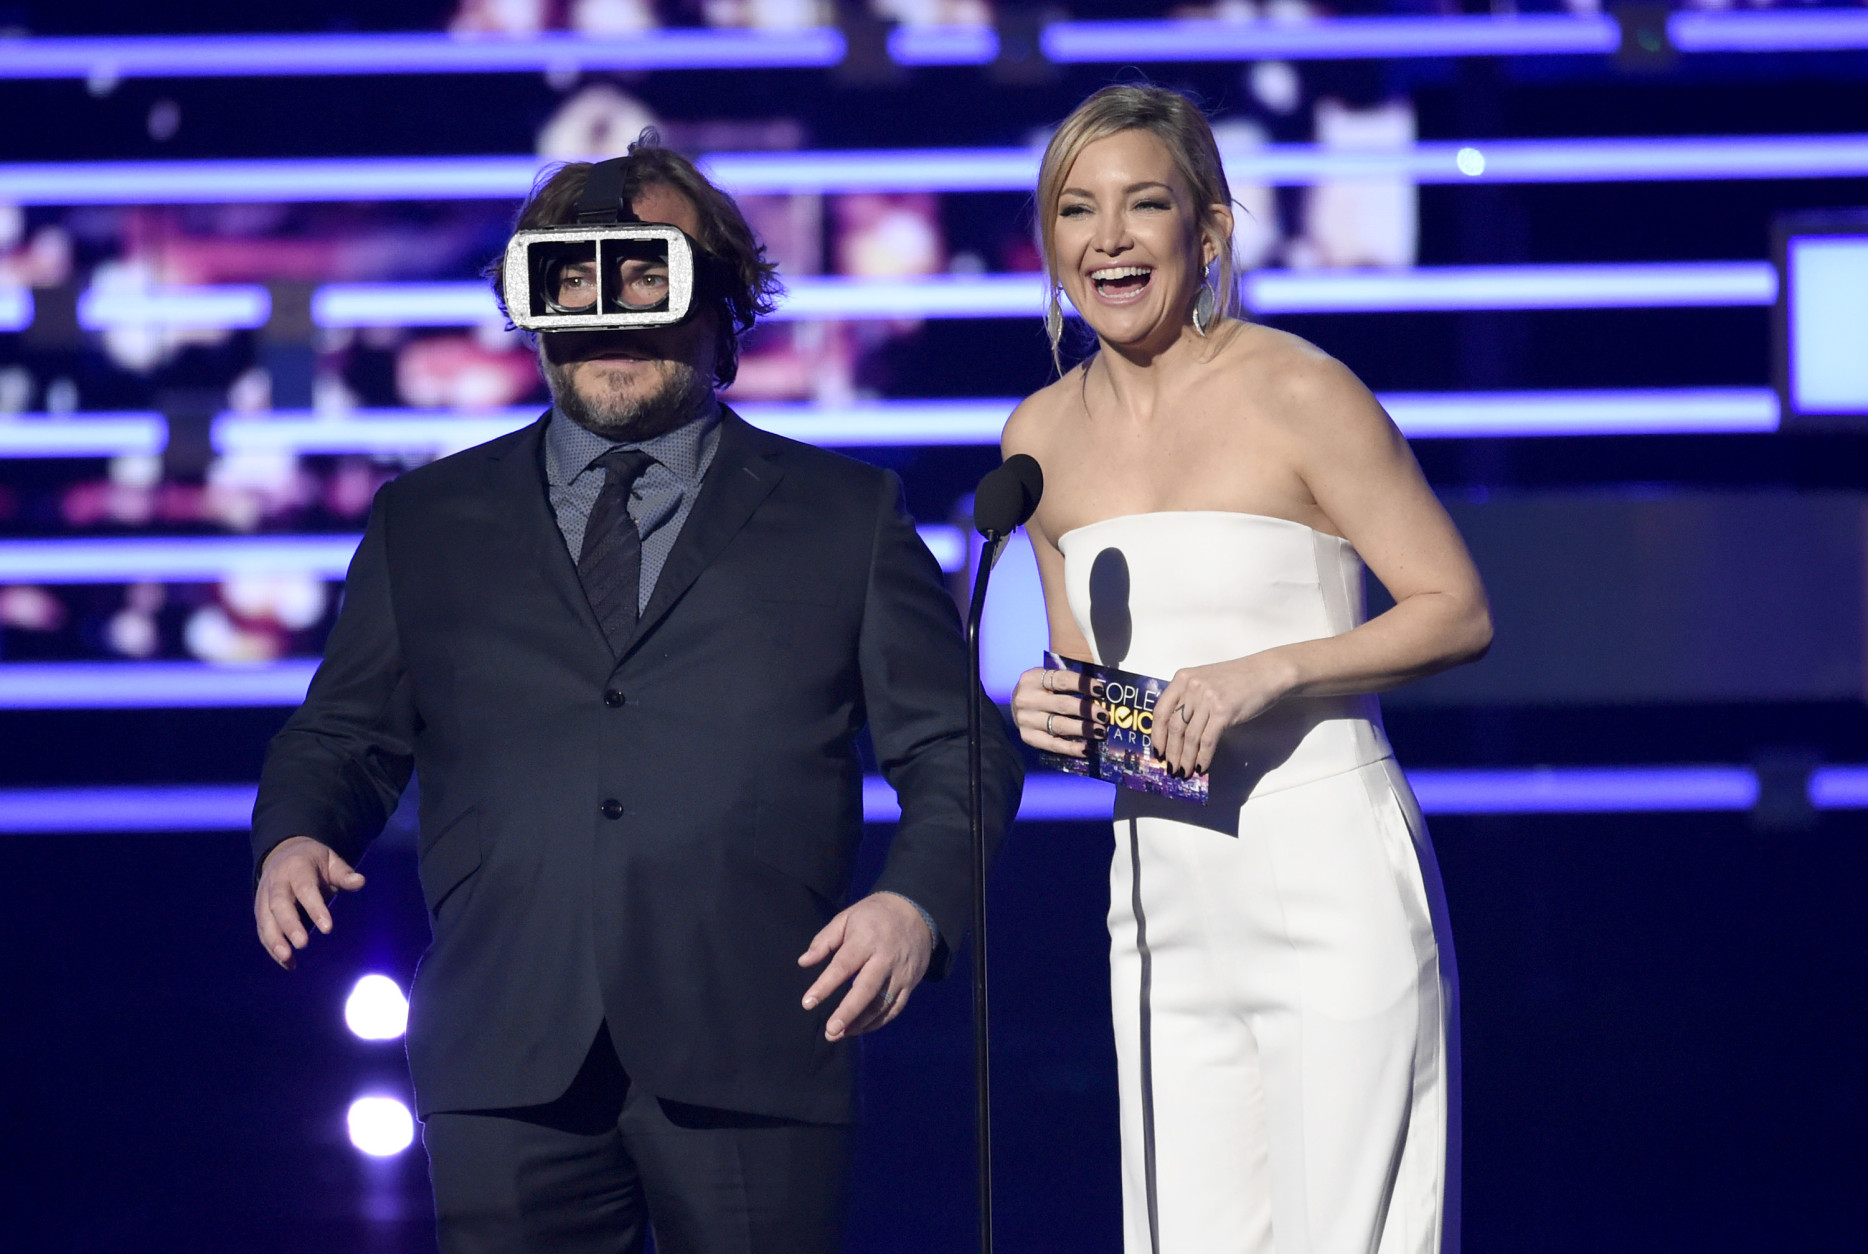 Jack Black, left, and Kate Hudson present the award for favorite comedic movie actress at the People's Choice Awards at the Microsoft Theater on Wednesday, Jan. 6, 2016, in Los Angeles. (Photo by Chris Pizzello/Invision/AP)